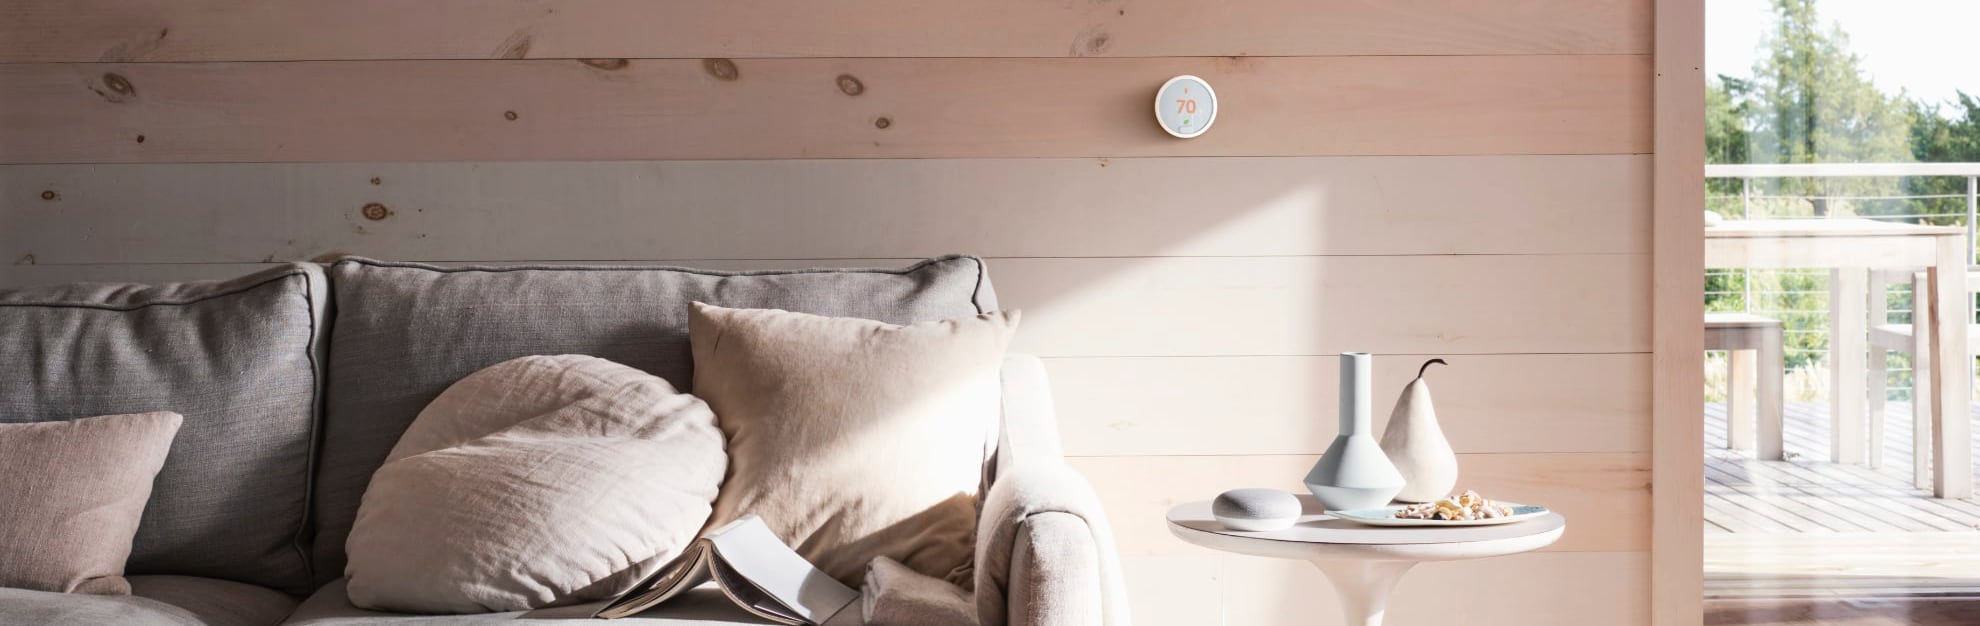 Vivint Home Automation in Medford